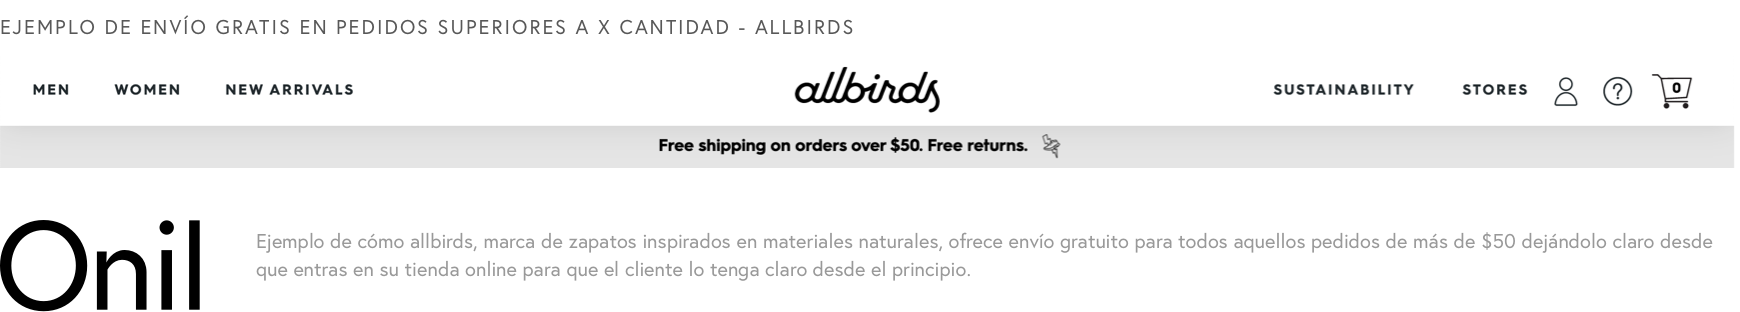 Example of free shipping on orders over X amount - allbirds